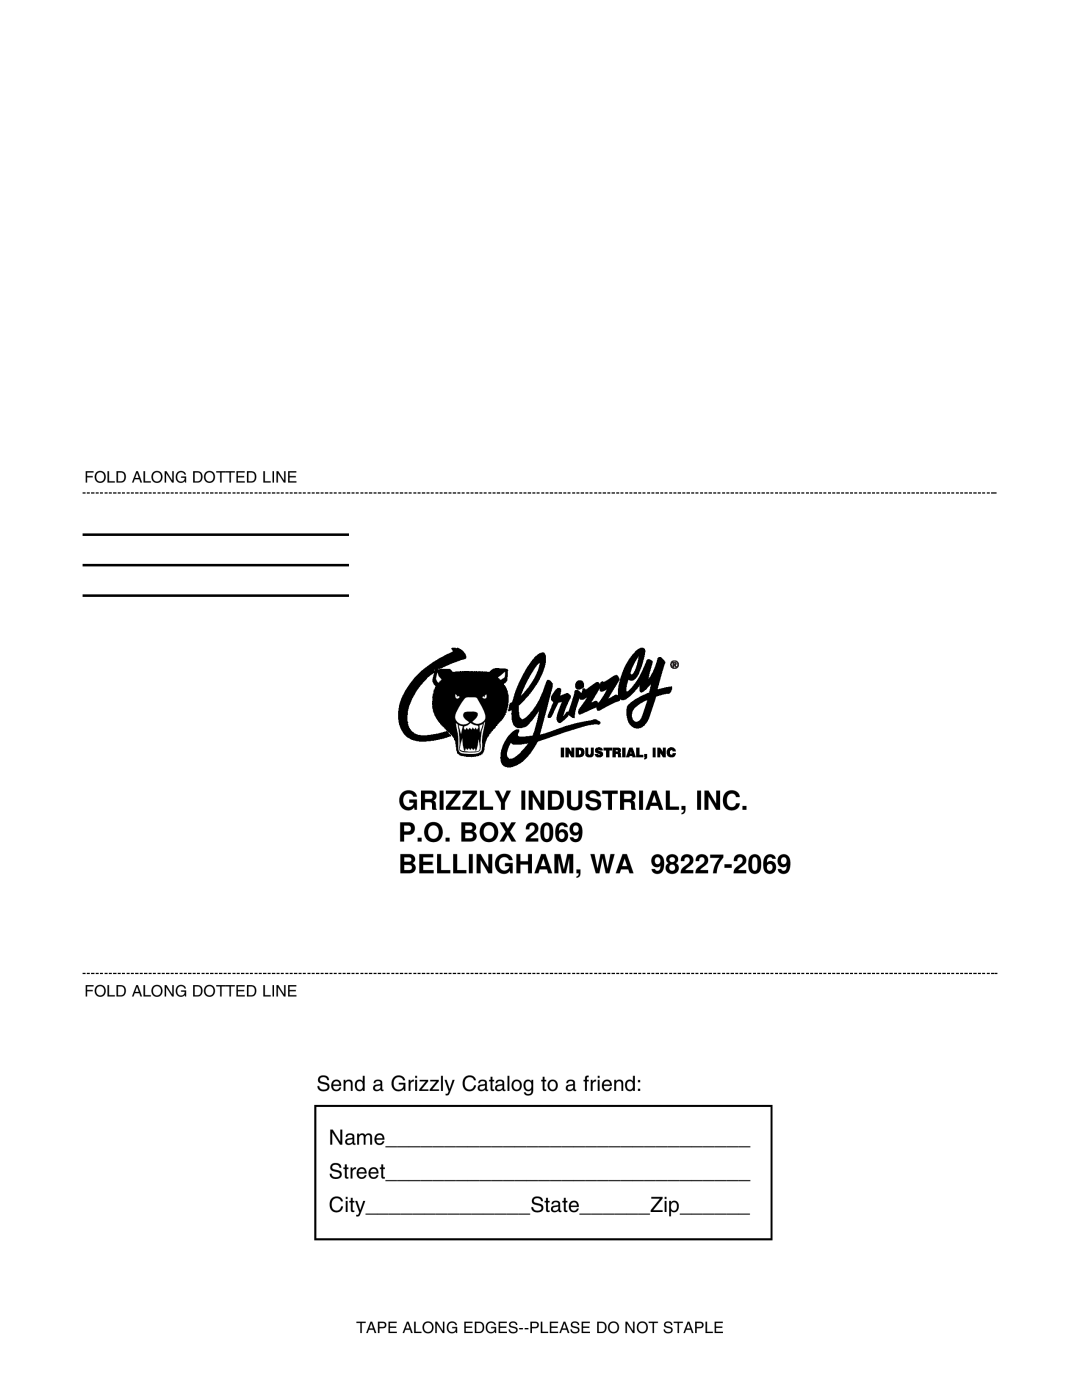 Grizzly G1183 Grizzly Industrial, Inc P.O. Box Bellingham, Wa, Send a Grizzly Catalog to a friend Name Street CityStateZip 